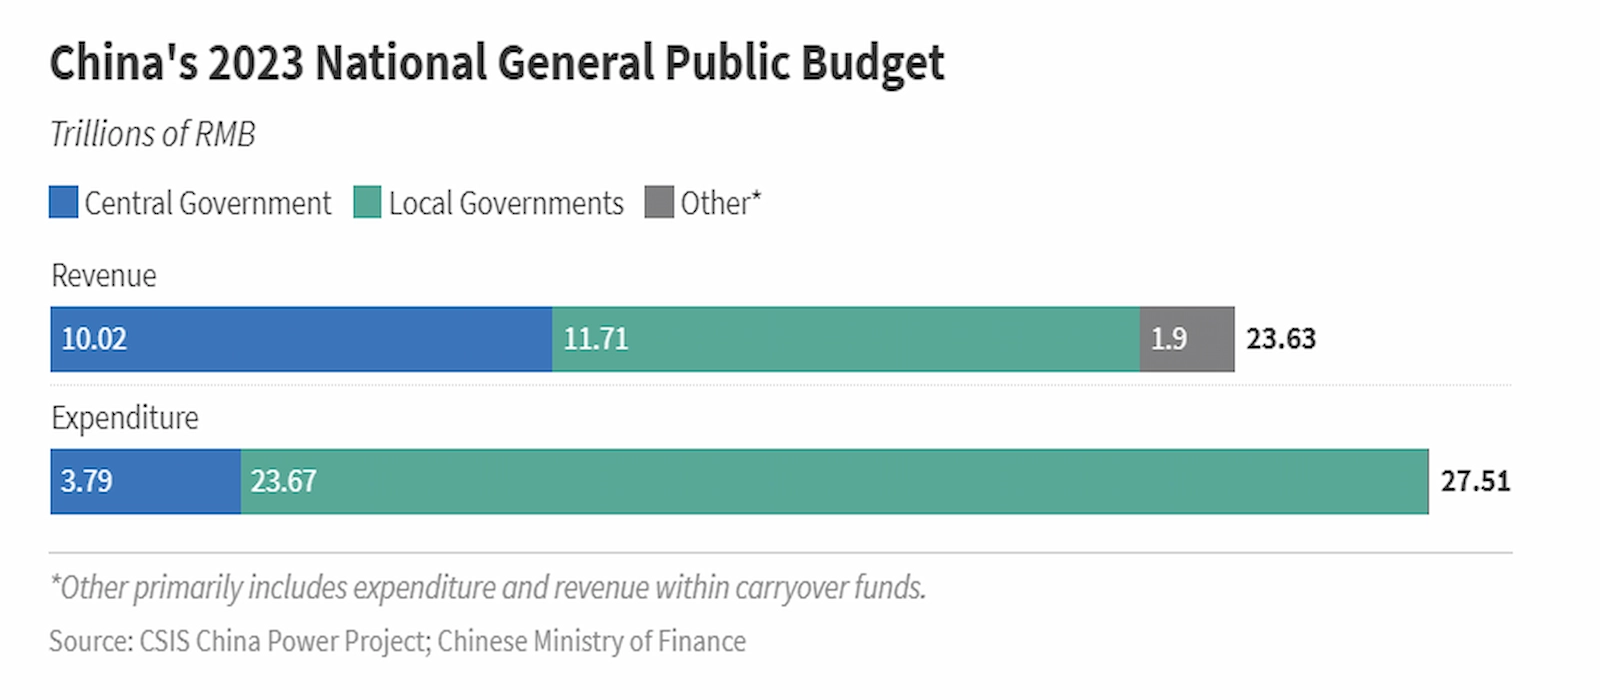 China's national public budget for 2023.